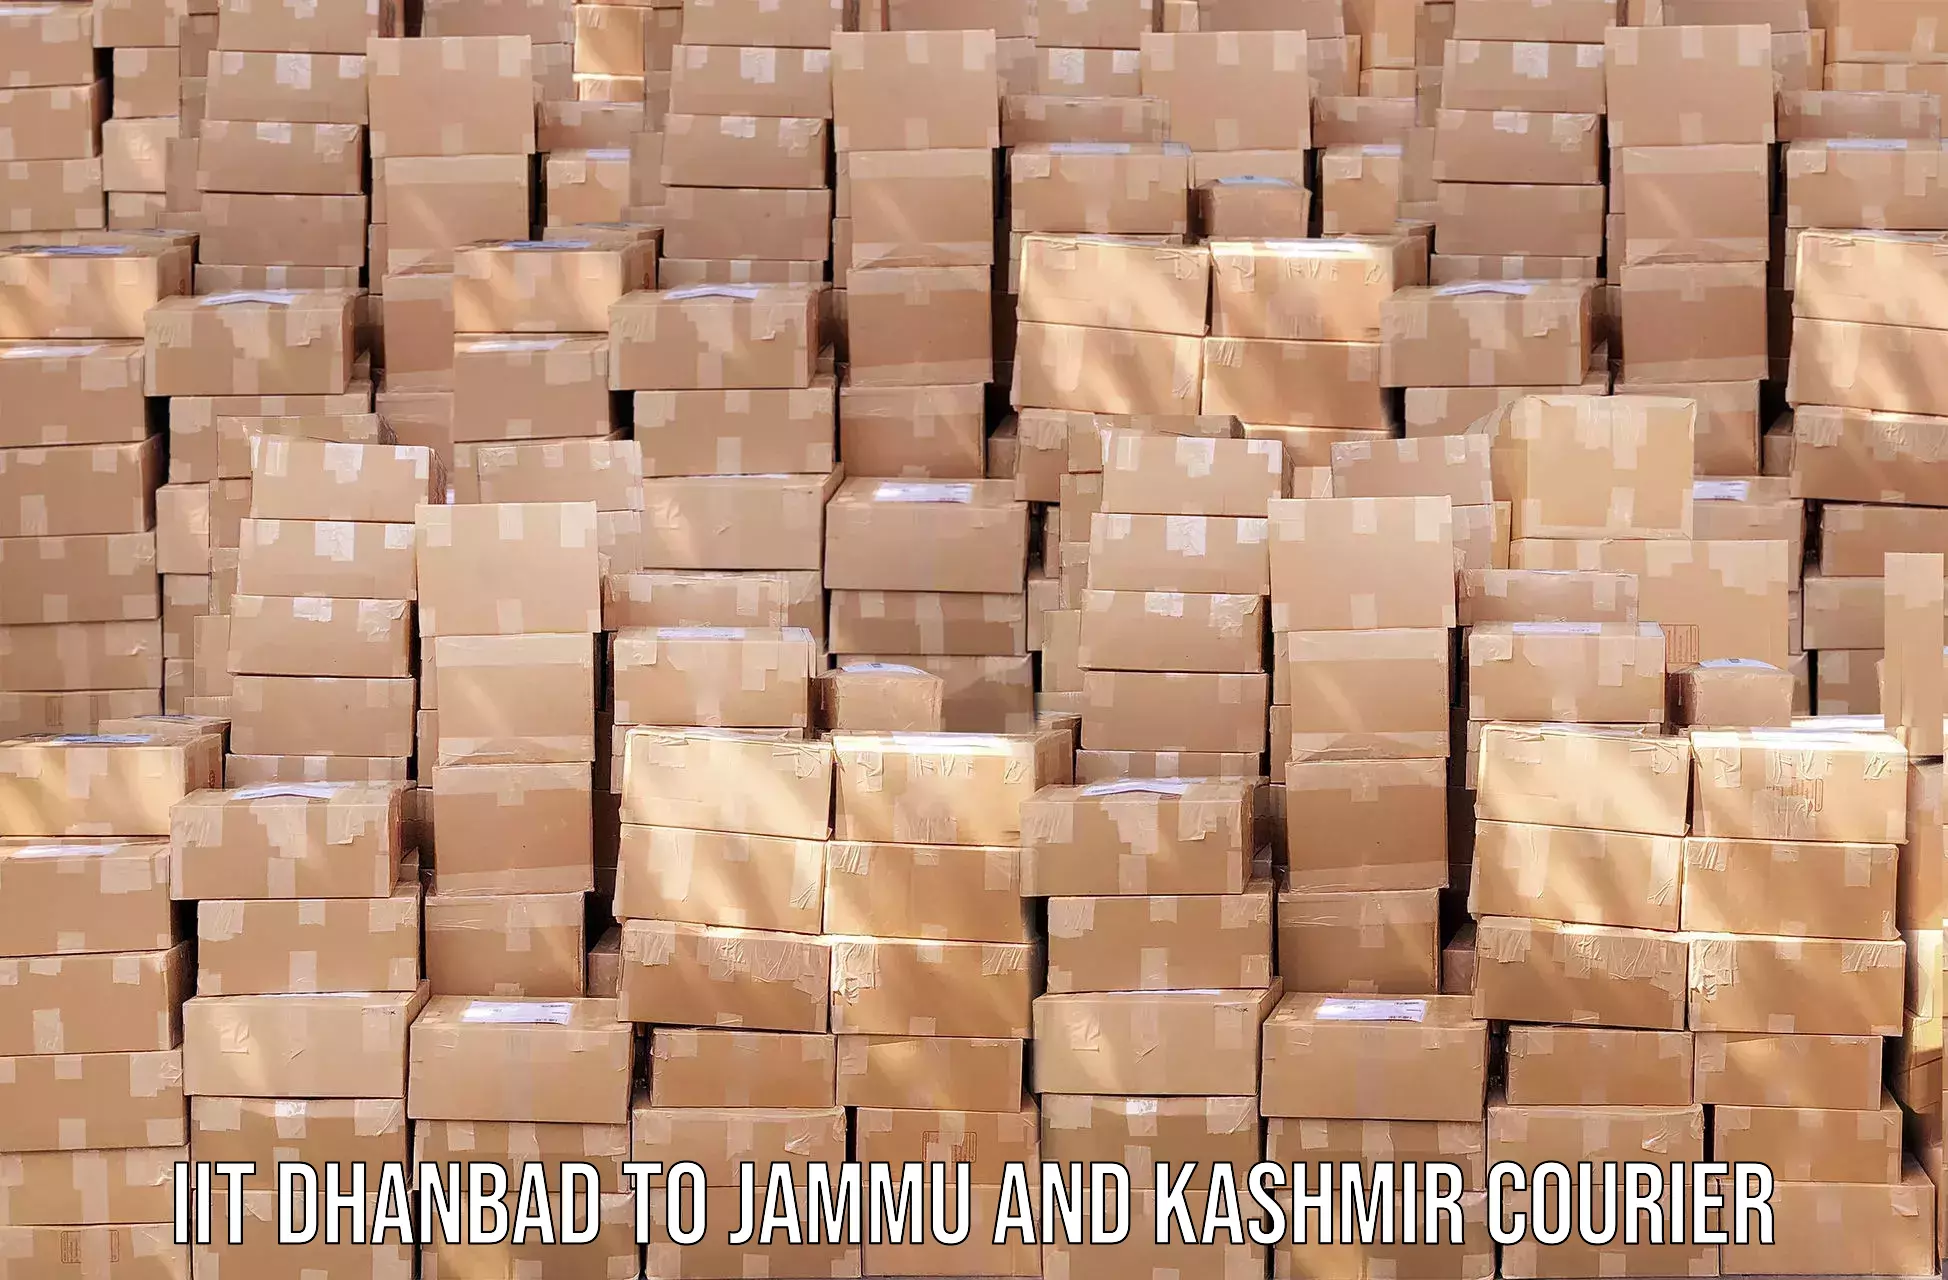 Ocean freight courier IIT Dhanbad to Bhaderwah